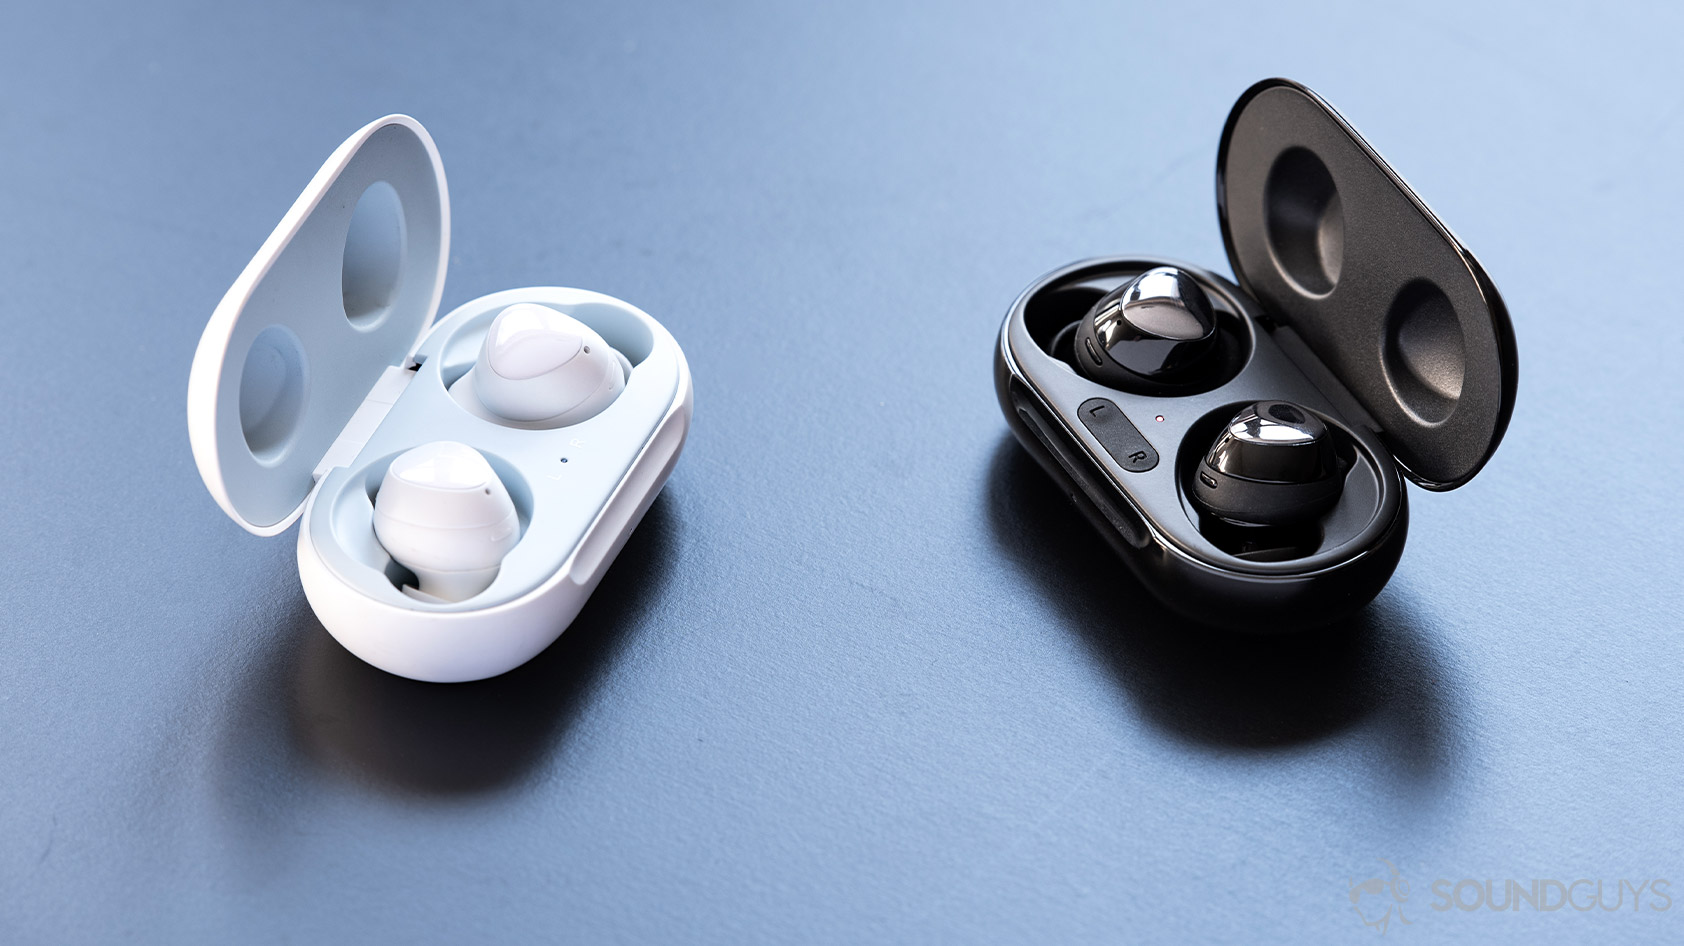 A comparison picture of the Samsung Galaxy Buds Plus and Galaxy Buds in their respective cases, angled toward each other; both headsets are more feature-dense than the Edifier TWS6.